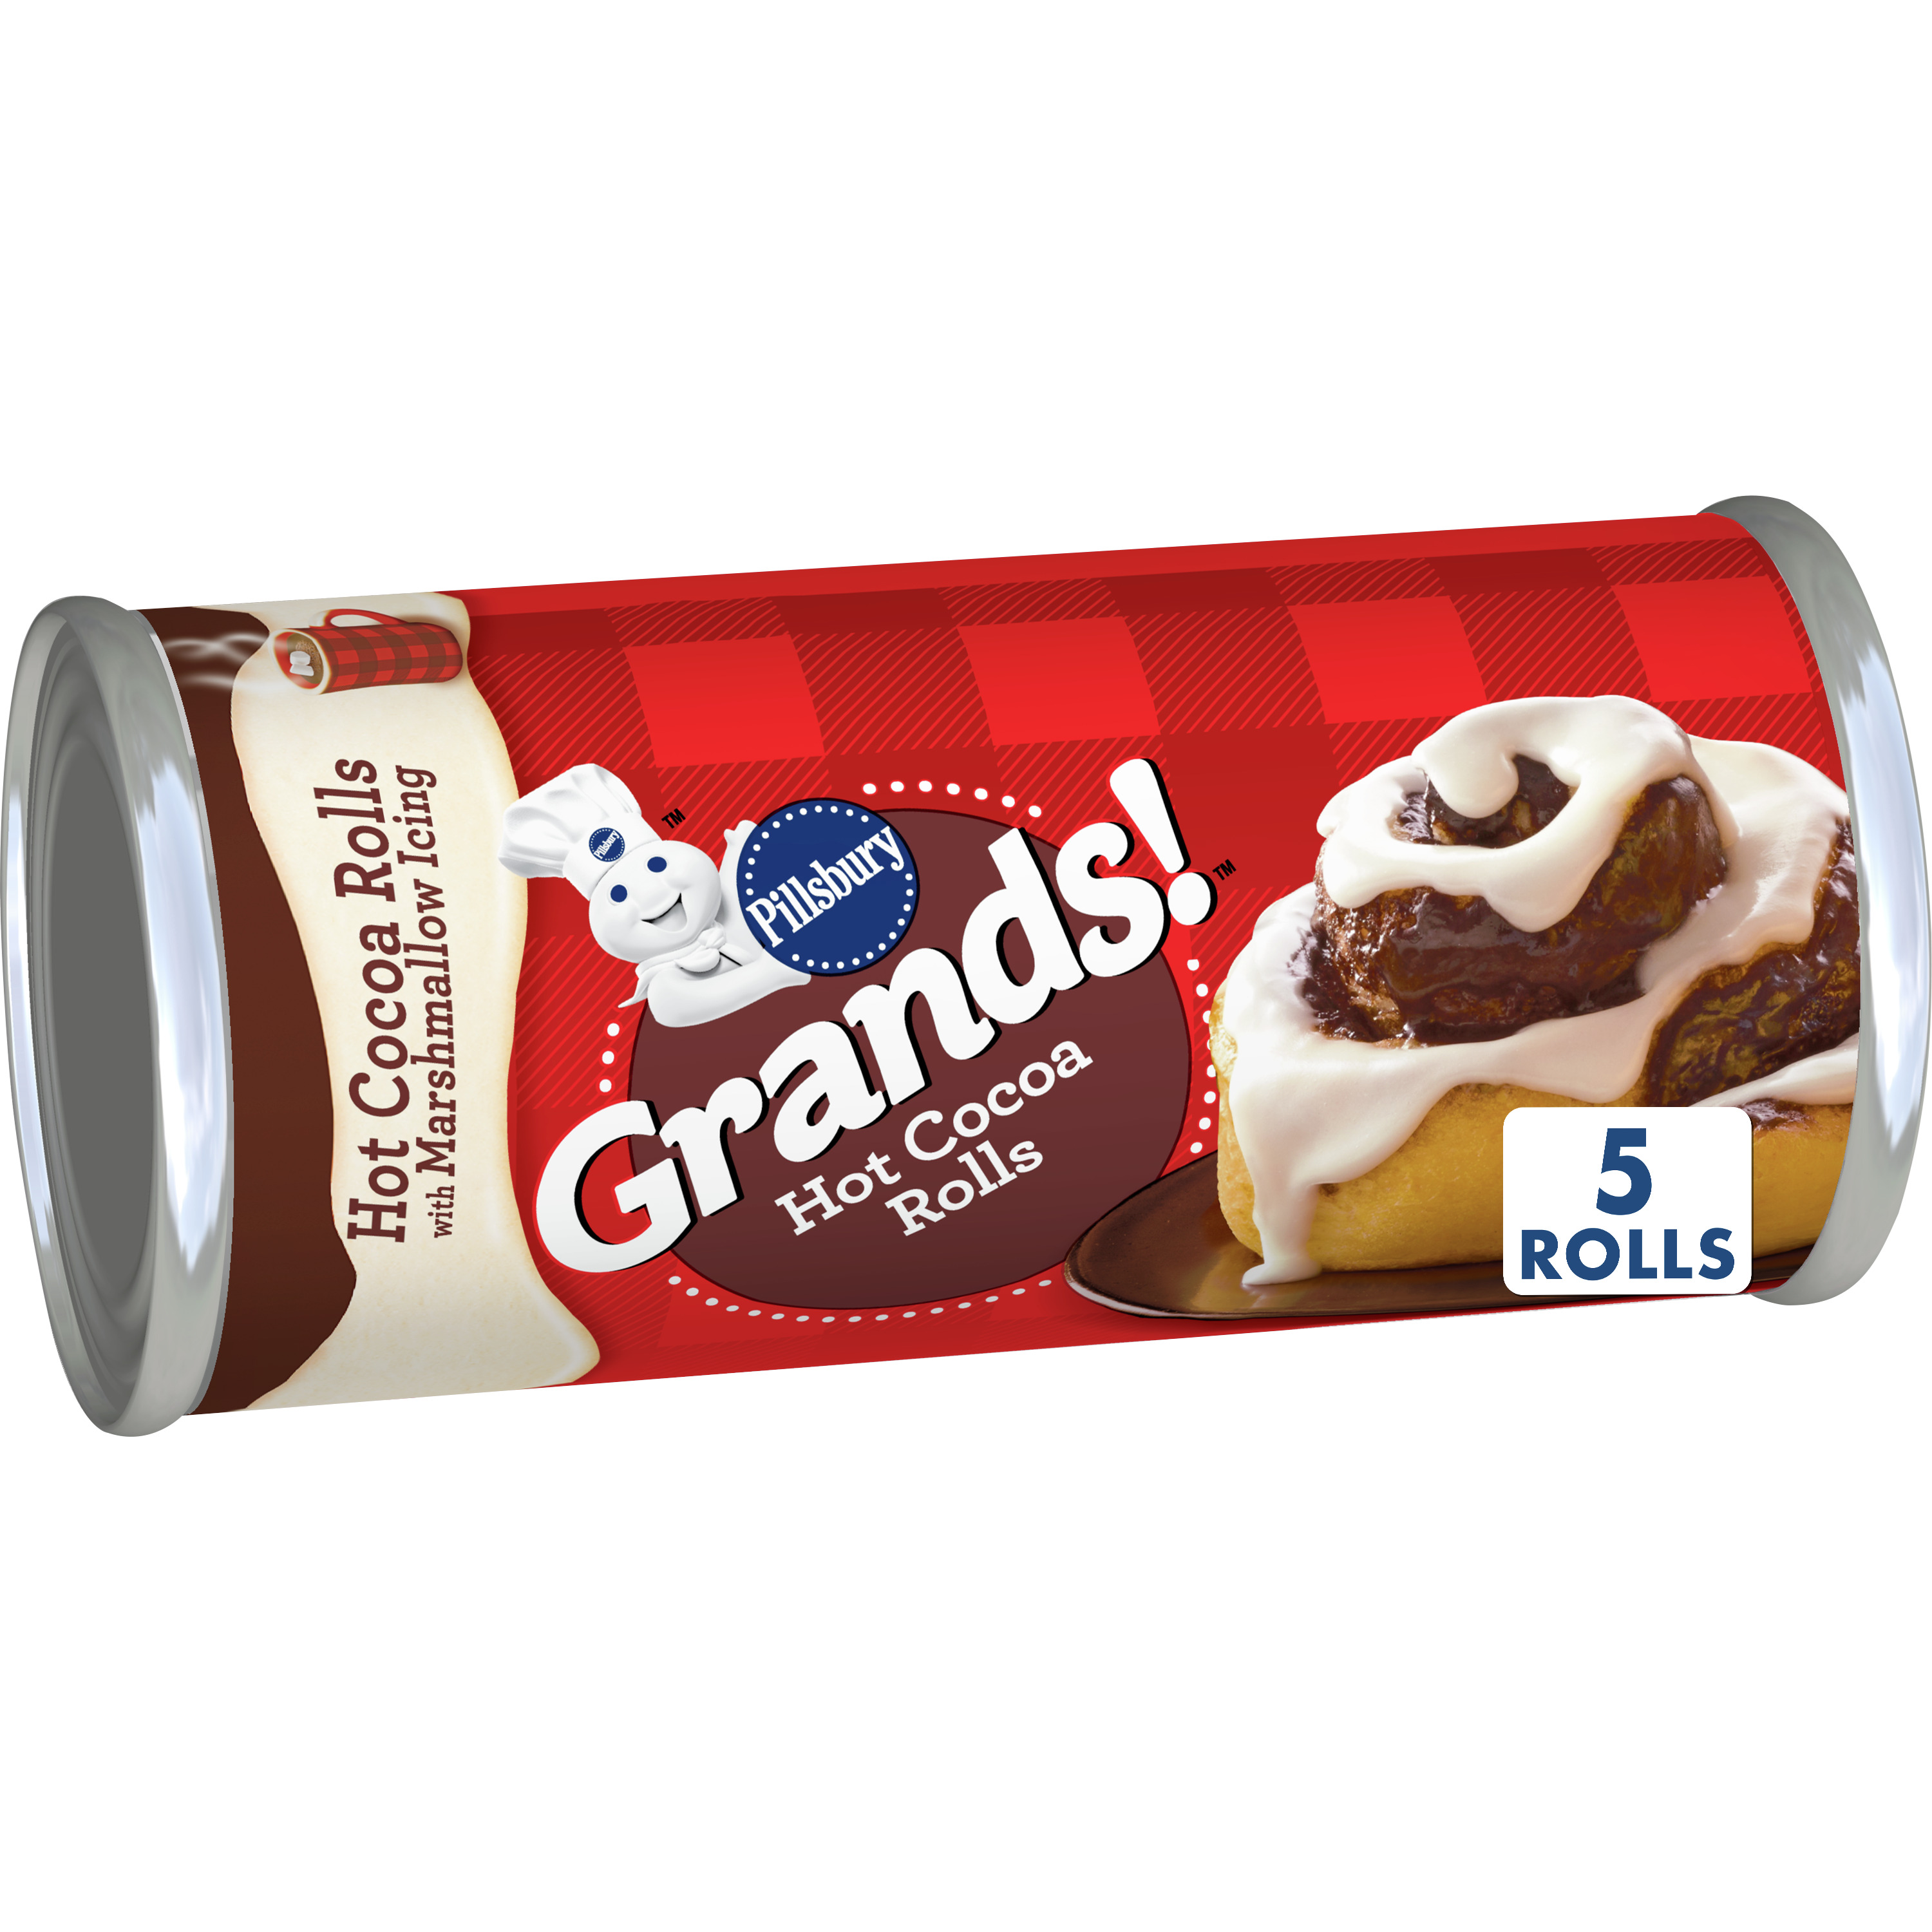 Pillsbury Grands! Holiday Edition Hot Cocoa Flavored Cinnamon Rolls with Icing, 5 Rolls - image 1 of 10